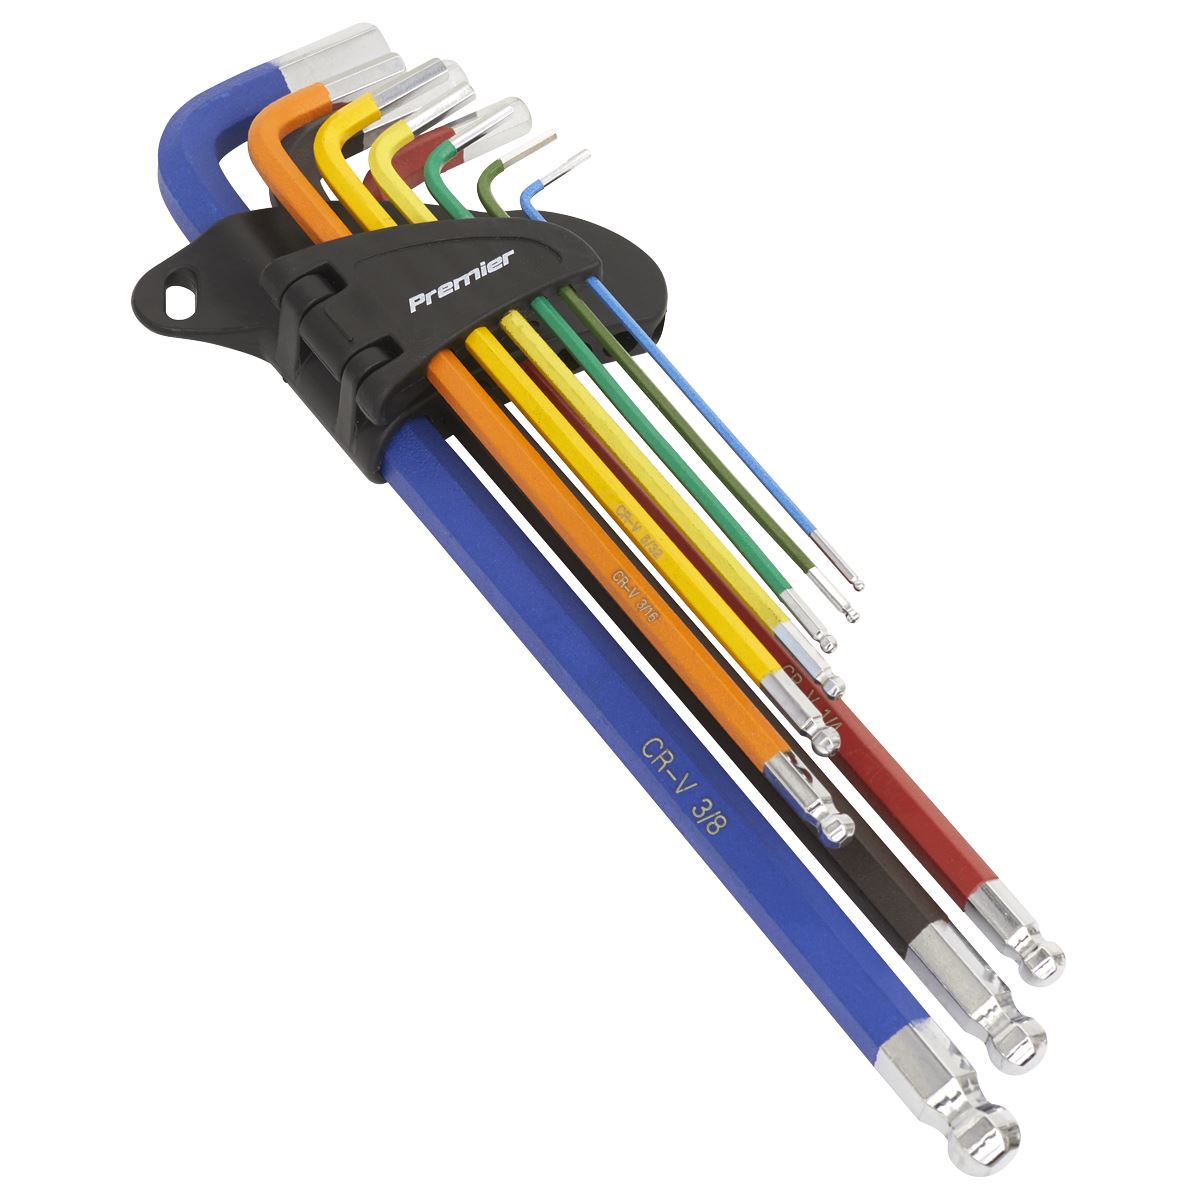 Sealey Premier Ball-End Hex Key Set Extra-Long 9pc Colour-Coded Imperial